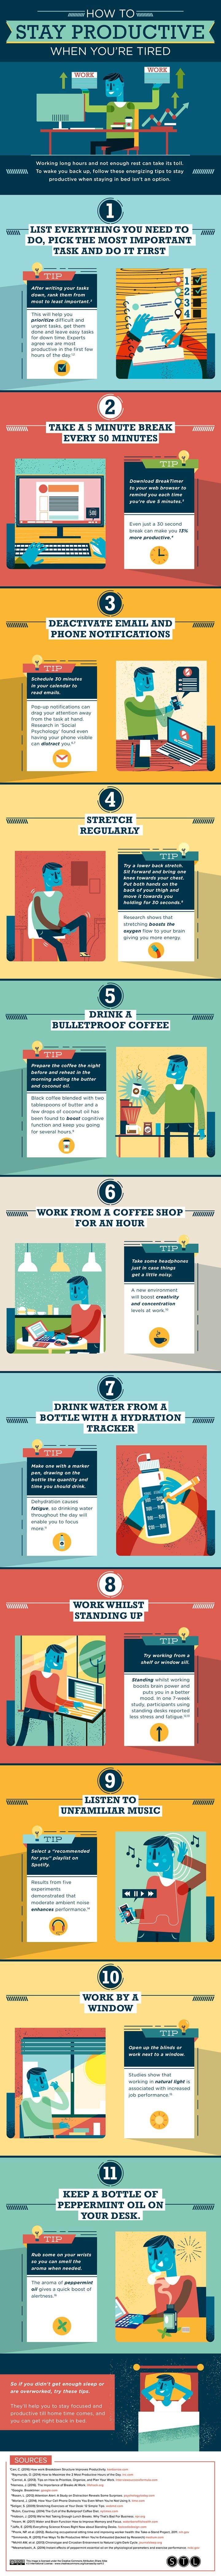 1531027222_165_Marketing-Infographic-Productivity-tips-for-small-business-owners-entrepreneurs-and-bloggers-Wonder Marketing Infographic : Productivity tips for small business owners, entrepreneurs, and bloggers! Wonder...